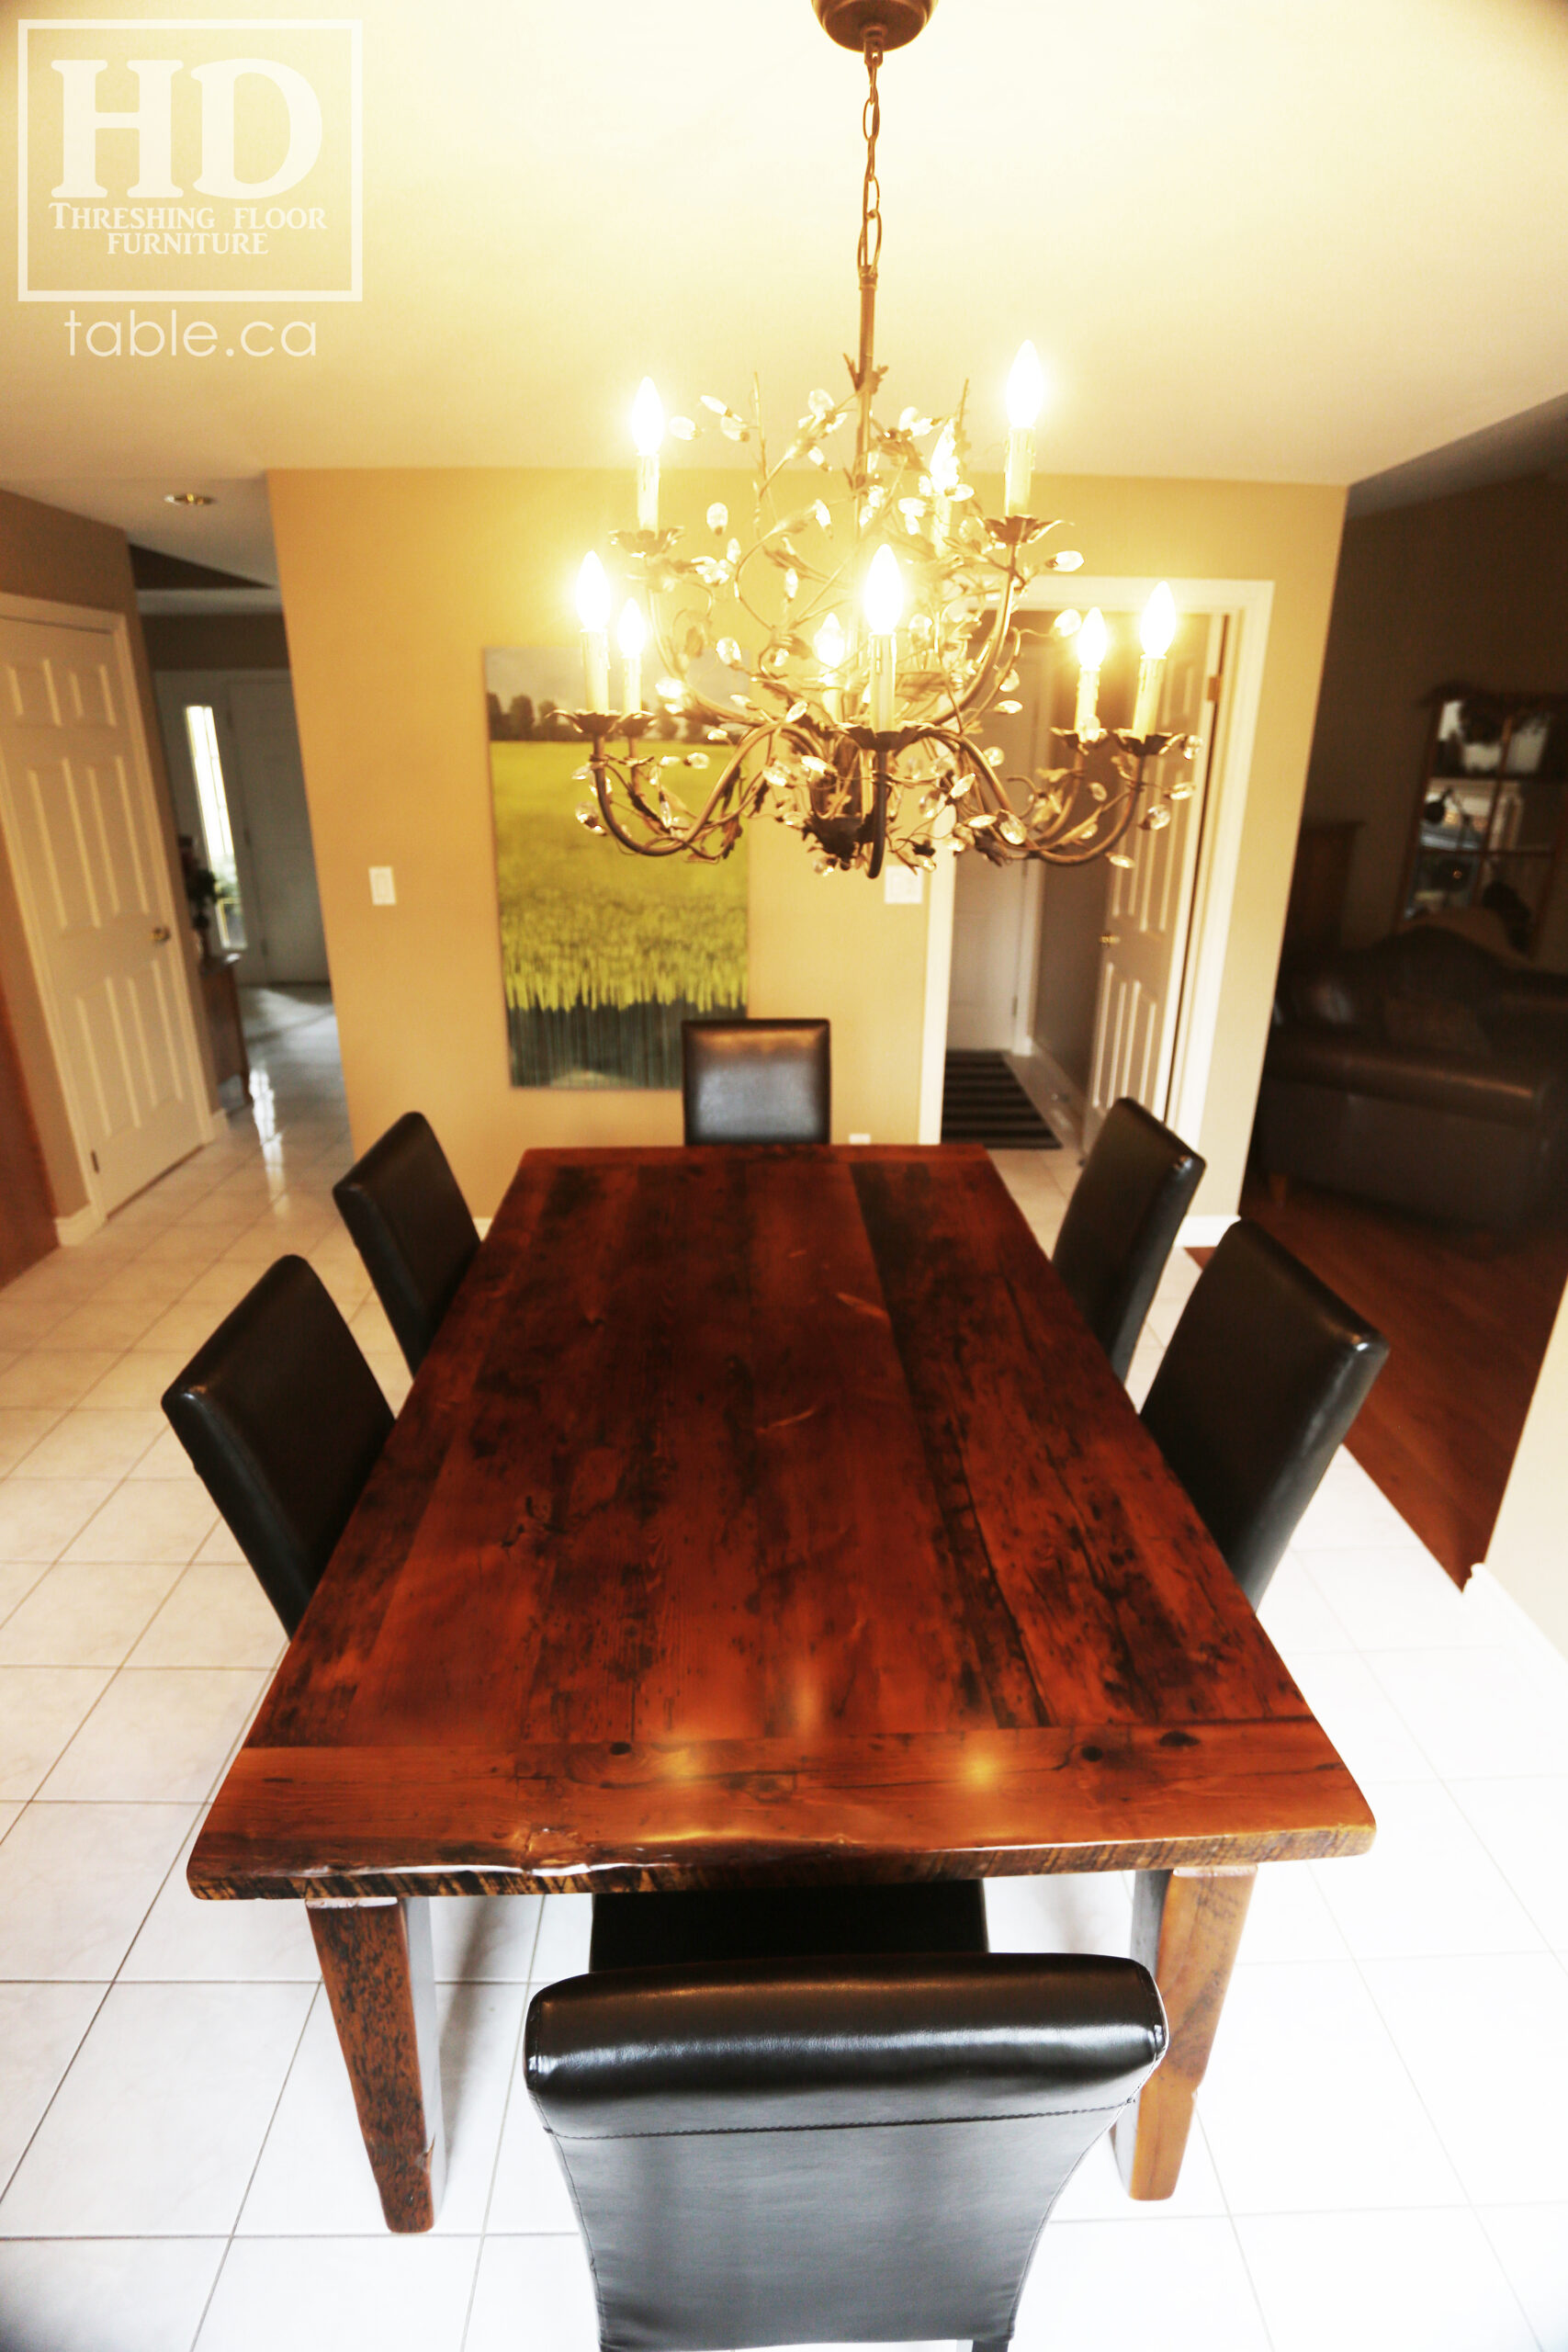 Reclaimed Wood Harvest Table made from Ontario Barnwood by HD Threshing Floor Furniture / www.table.ca